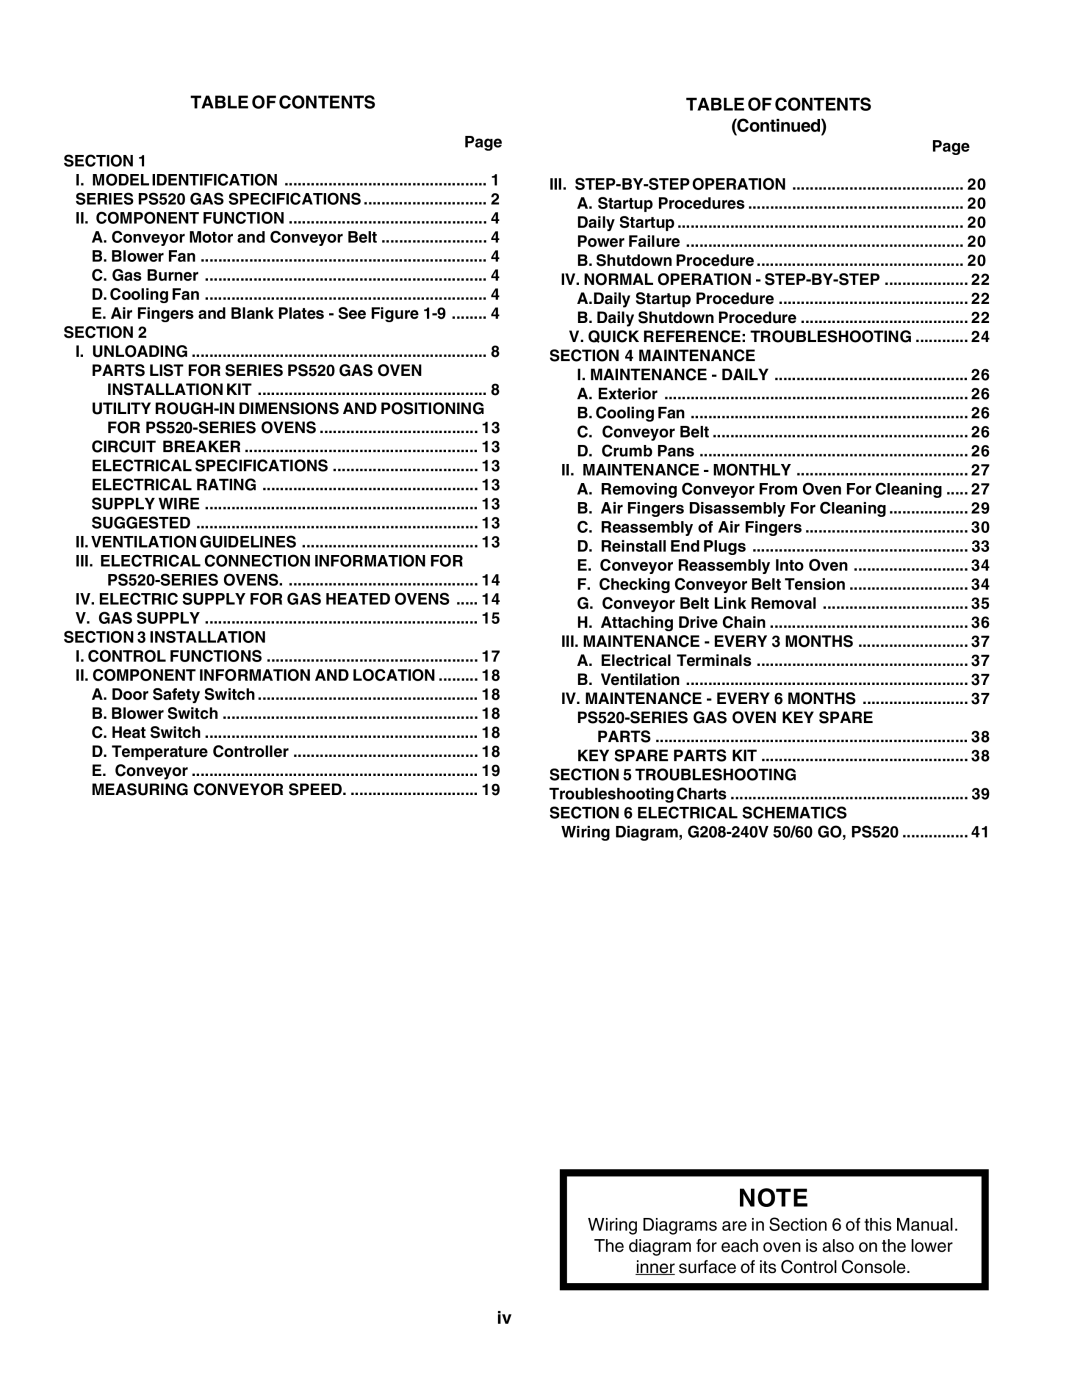 Middleby Marshall PS520G installation manual Table Of Contents, Continued 